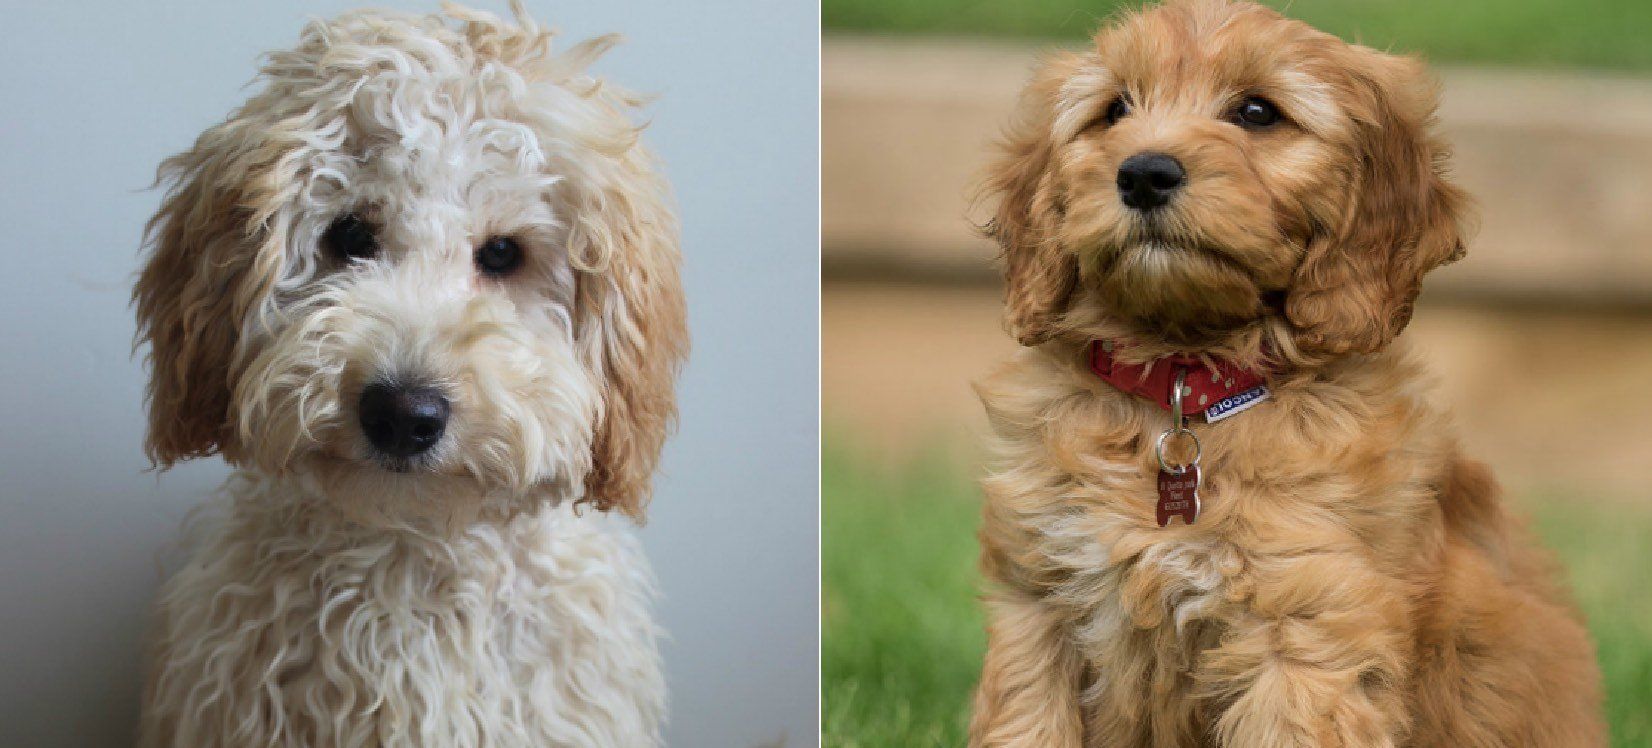 Labradoodle Vs Goldendoodle Fight Comparison & Difference